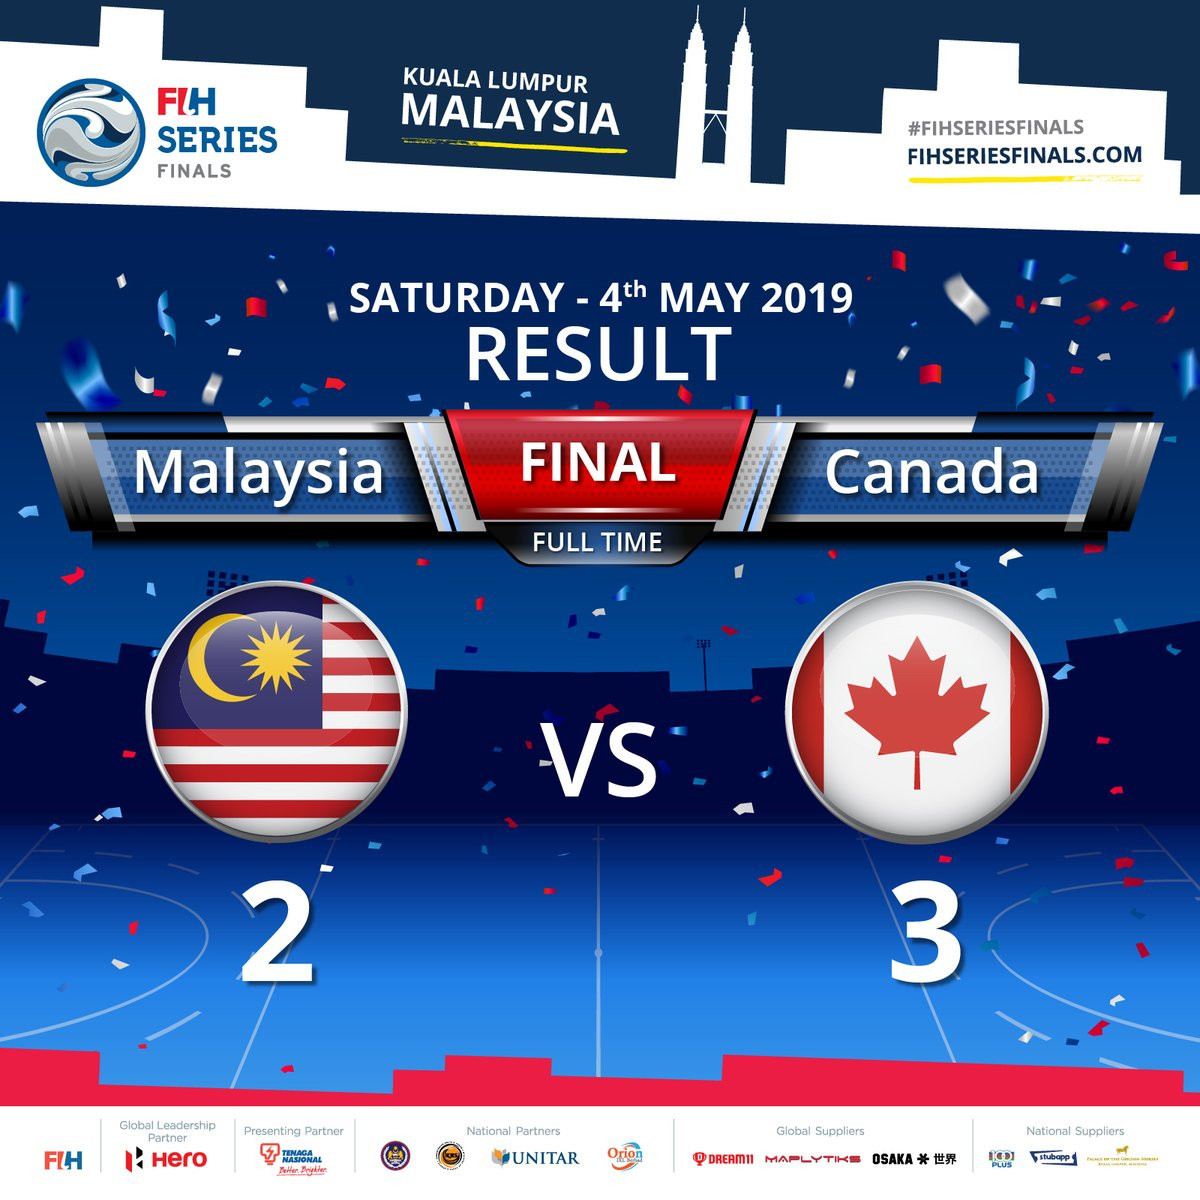 Canada won the final in the FIH Series Finals, defeating hosts Malaysia 3-2 ©FIH